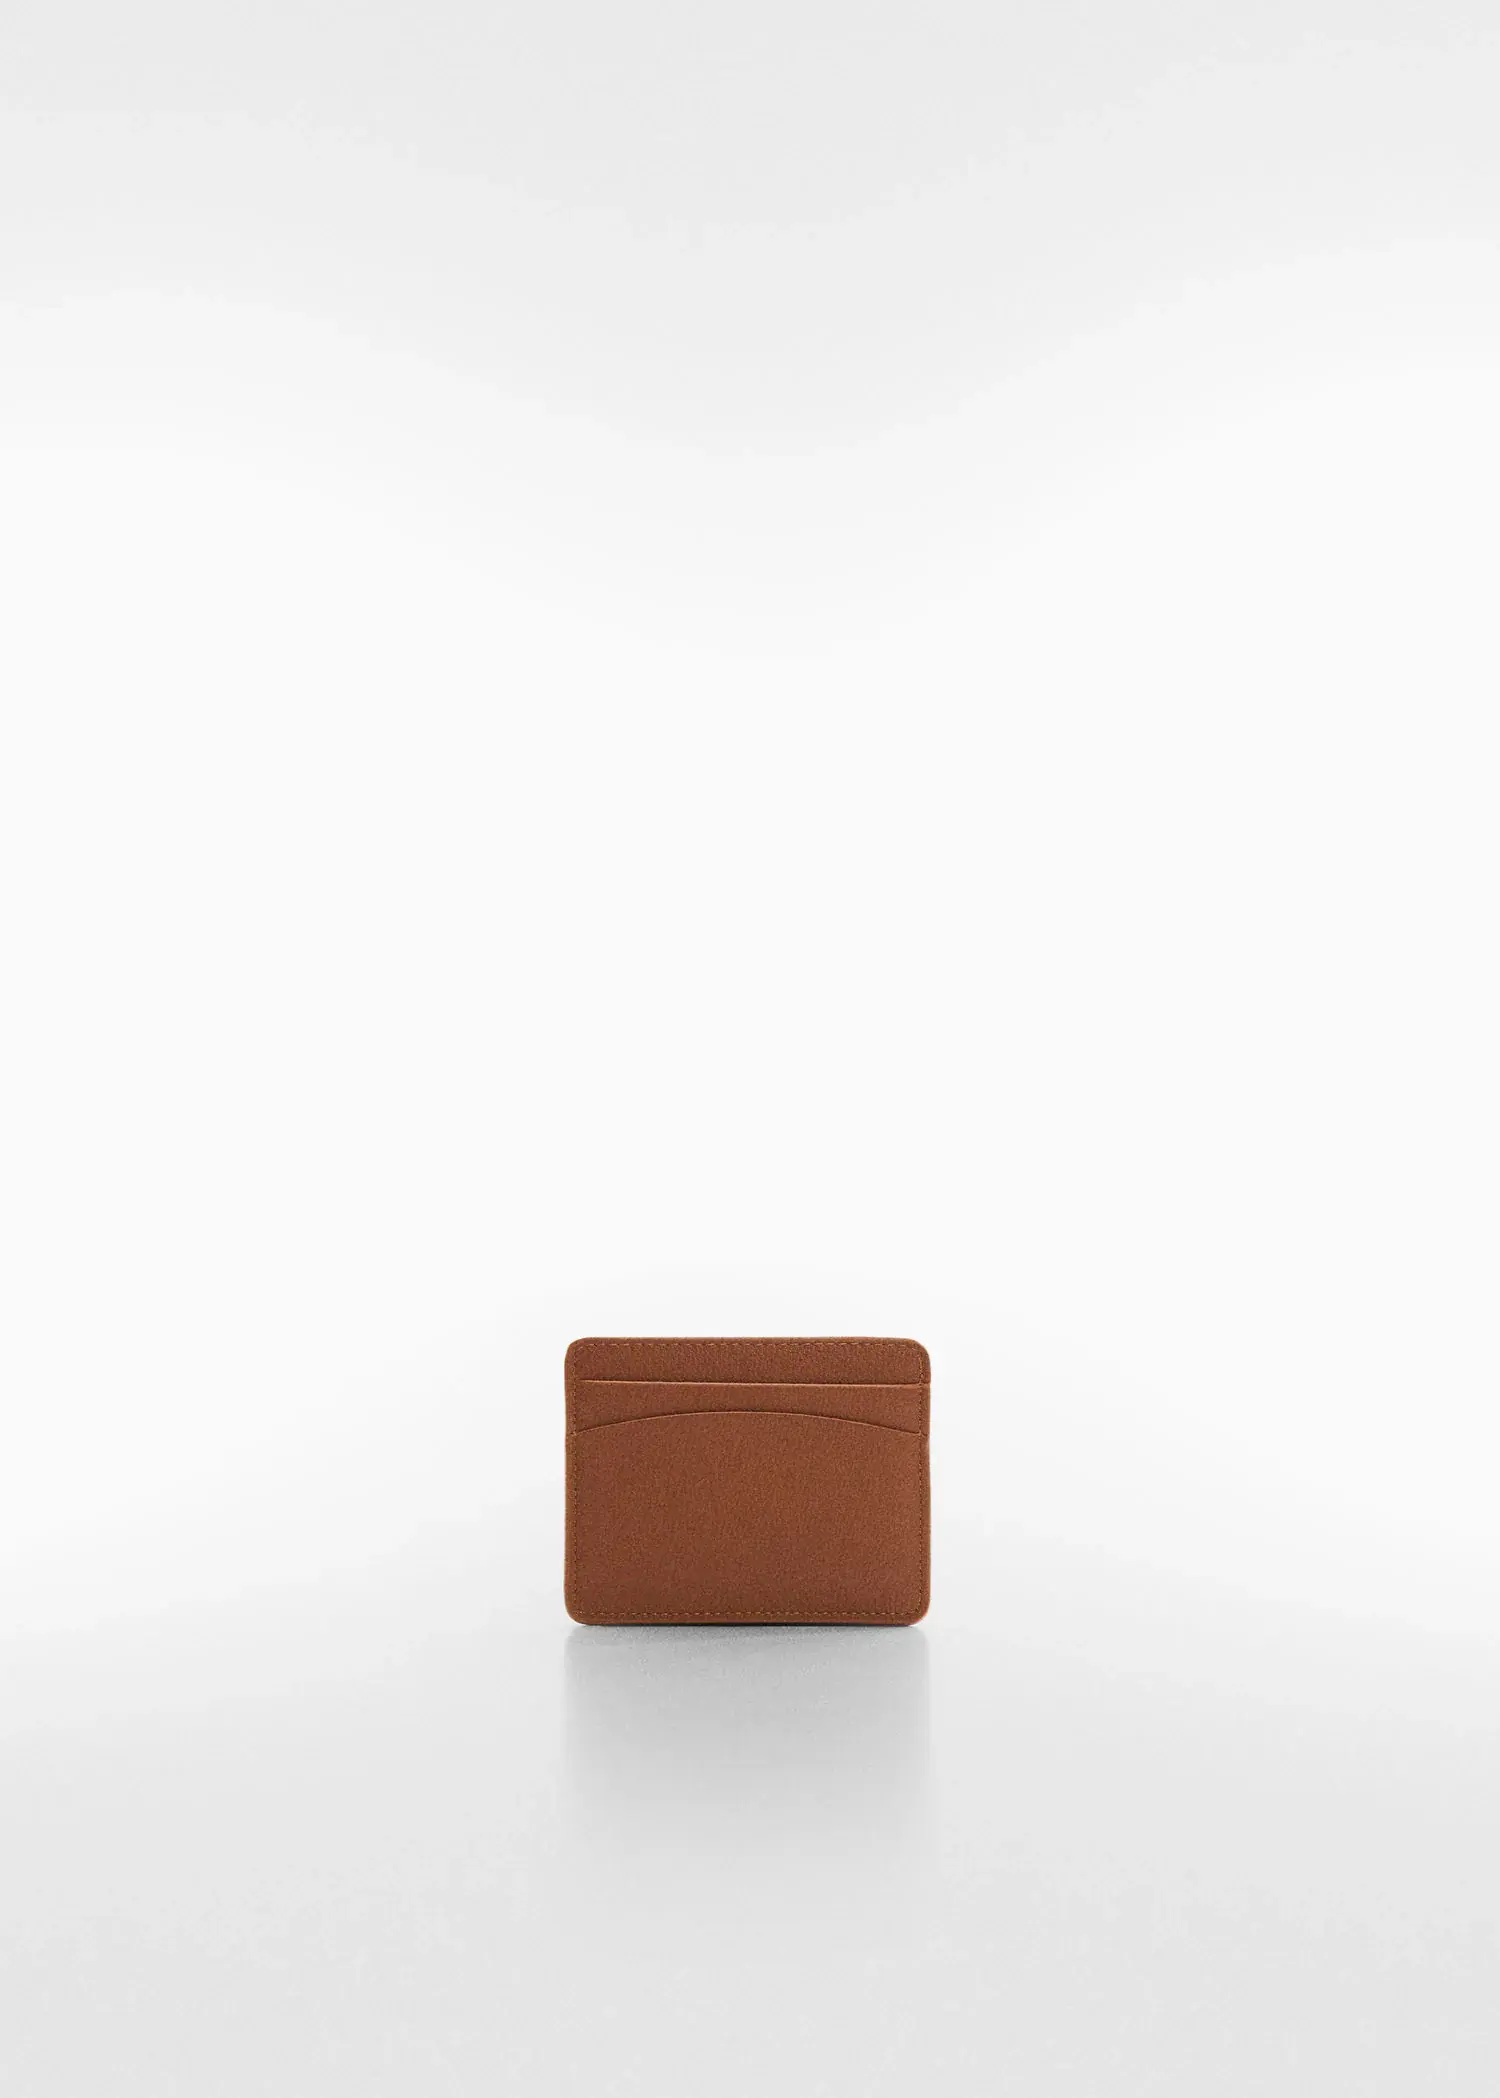 Mango Anti-contactless leather-effect card holder. a brown wallet sitting on top of a white table. 